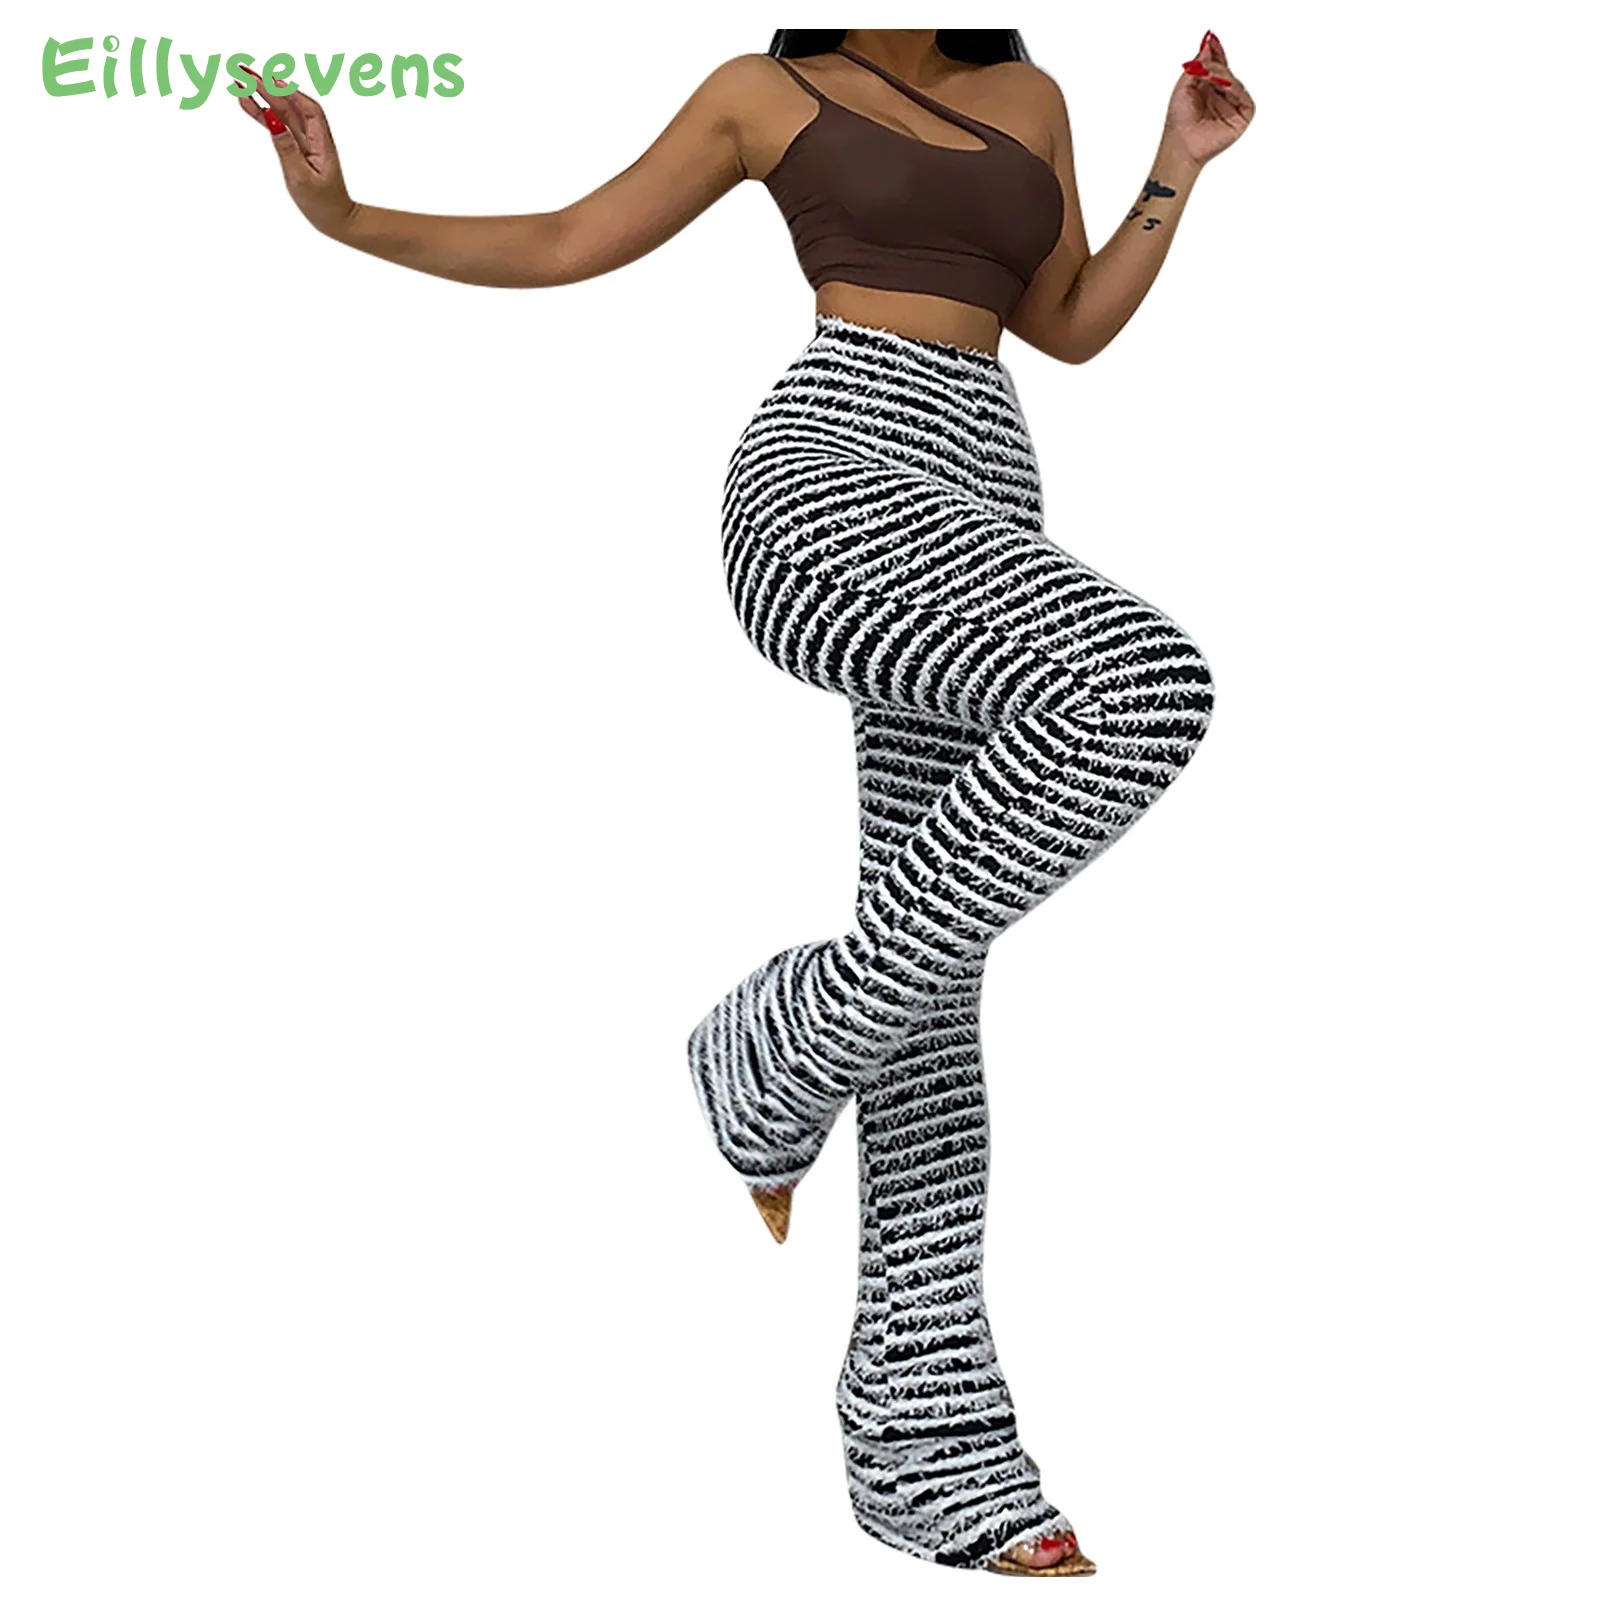 Spring New Sexy Trousers Women's Fashion Striped Slim High Waist Small Foot Pants Street Casual Clothing Women Trouser